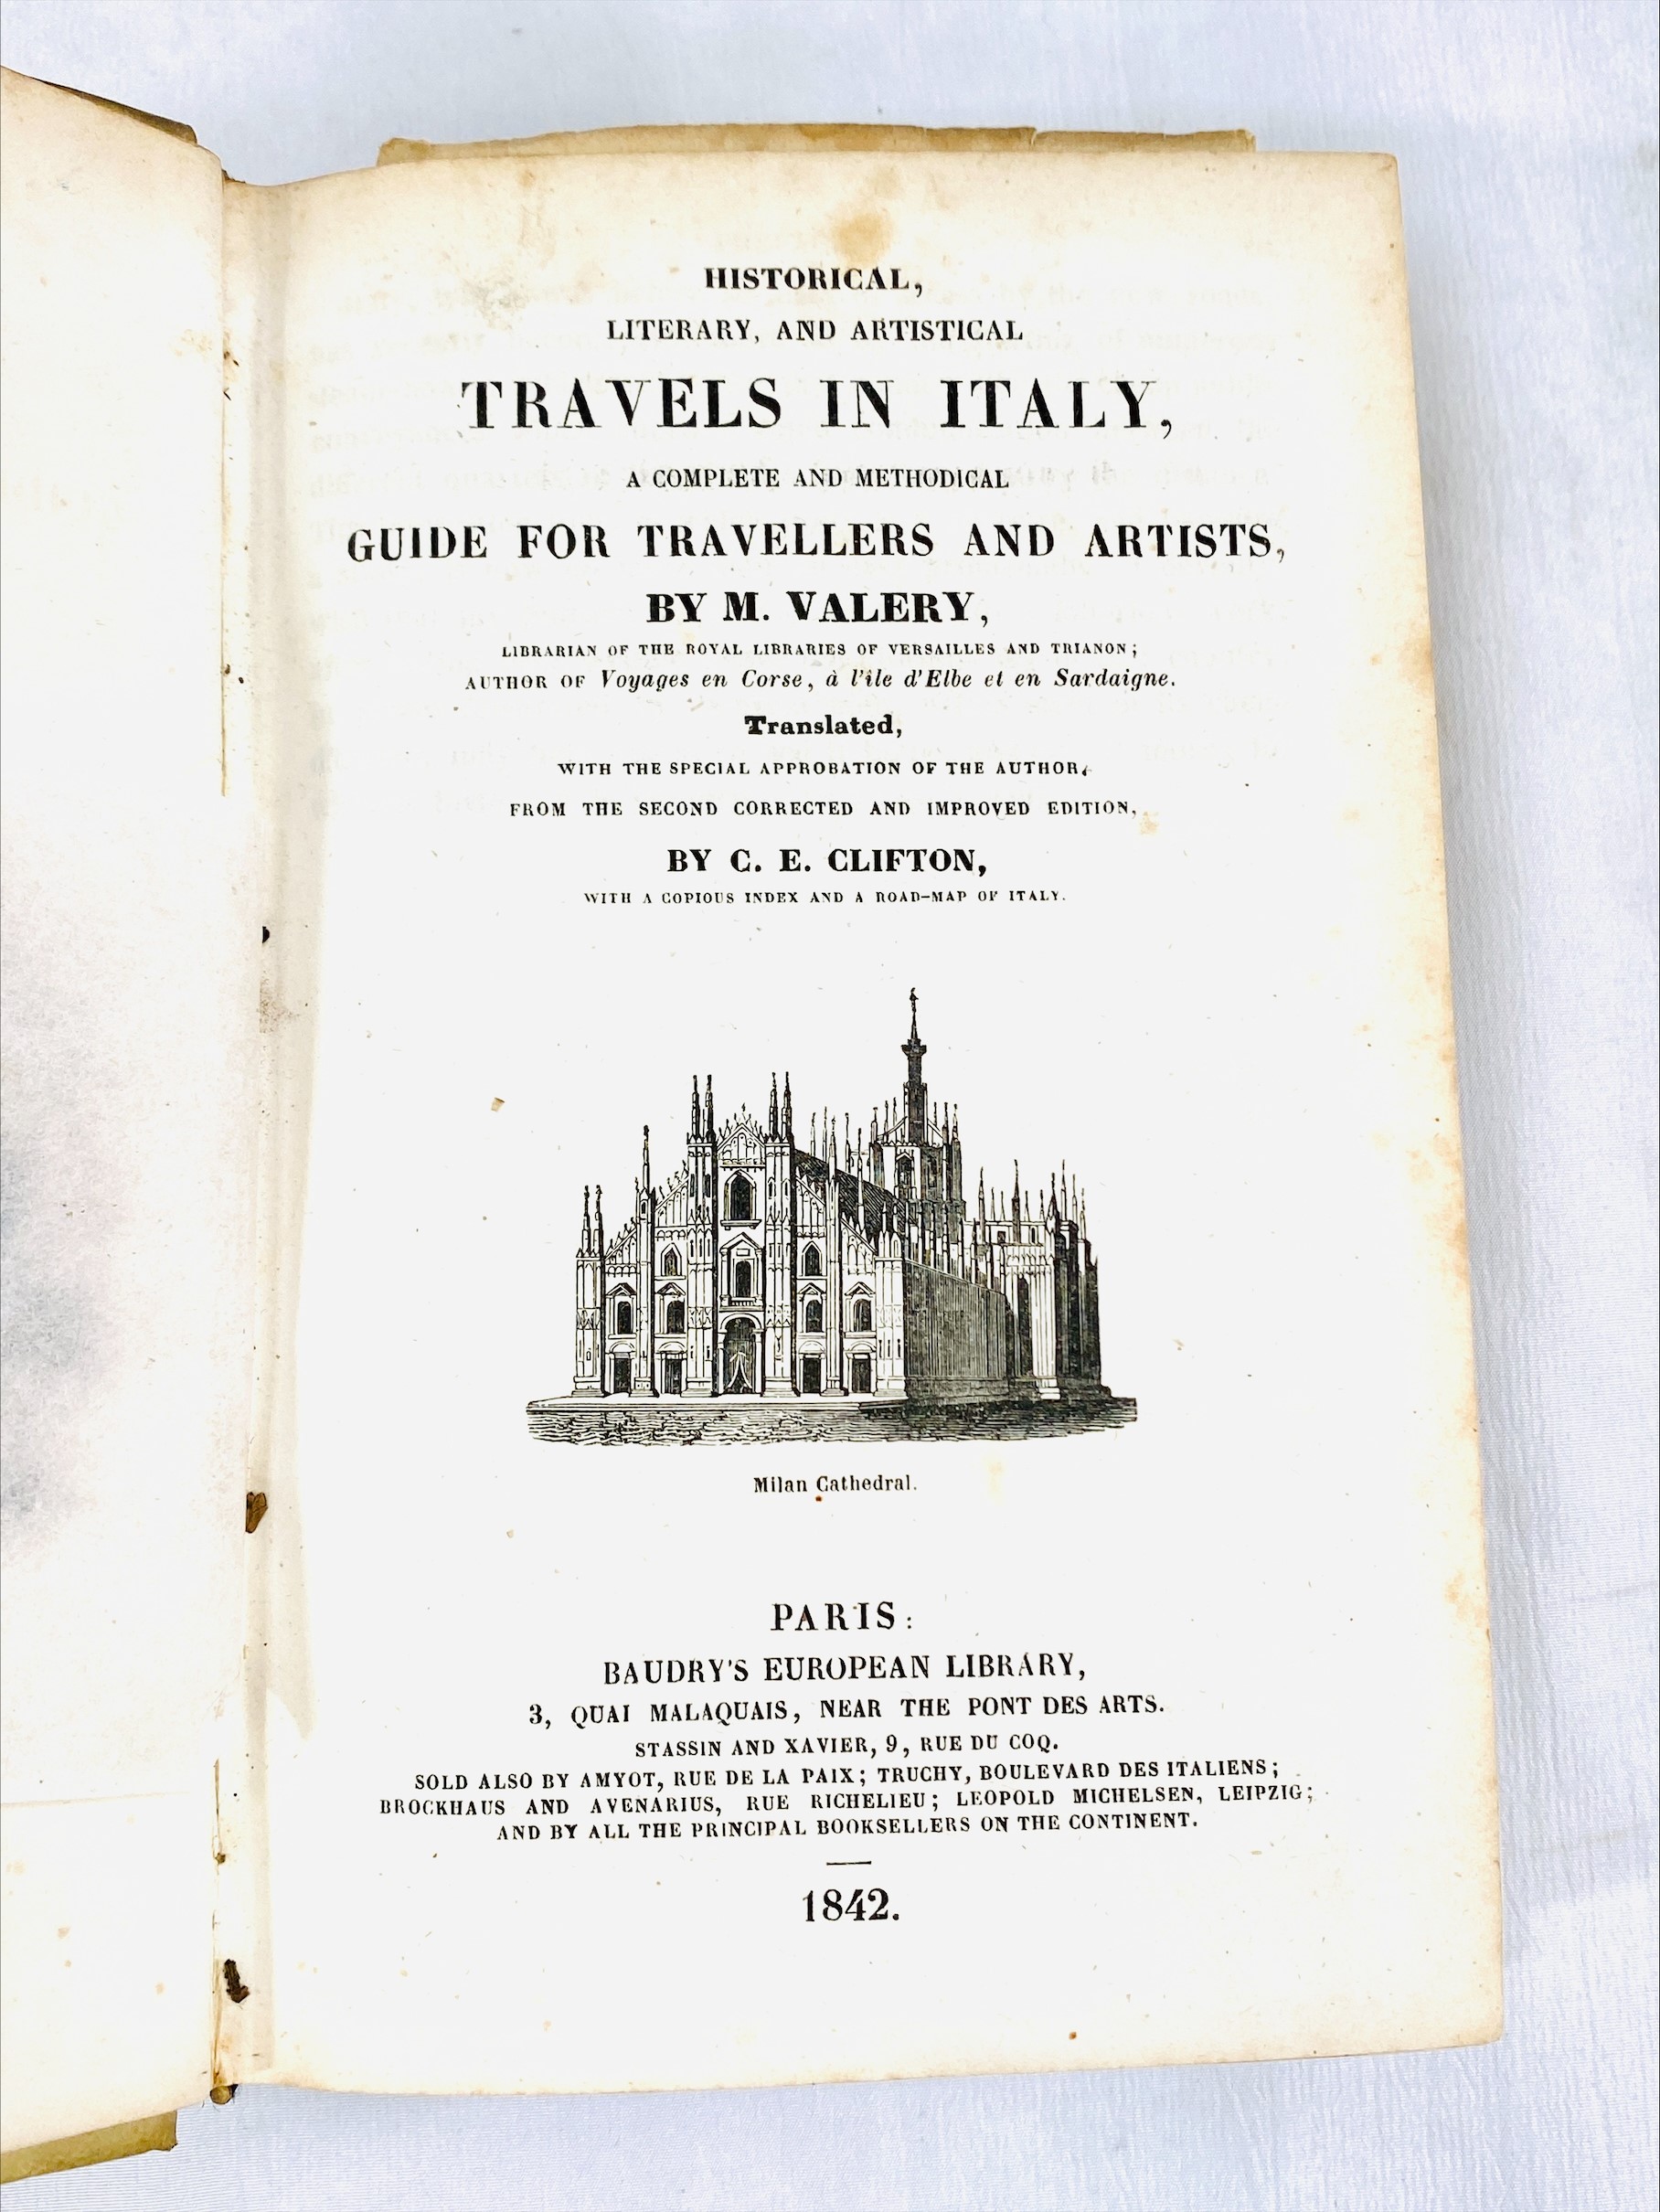 Valery’s Italy Historical literary and artistical travels in Italy Guide for travellers and artists - Image 3 of 5